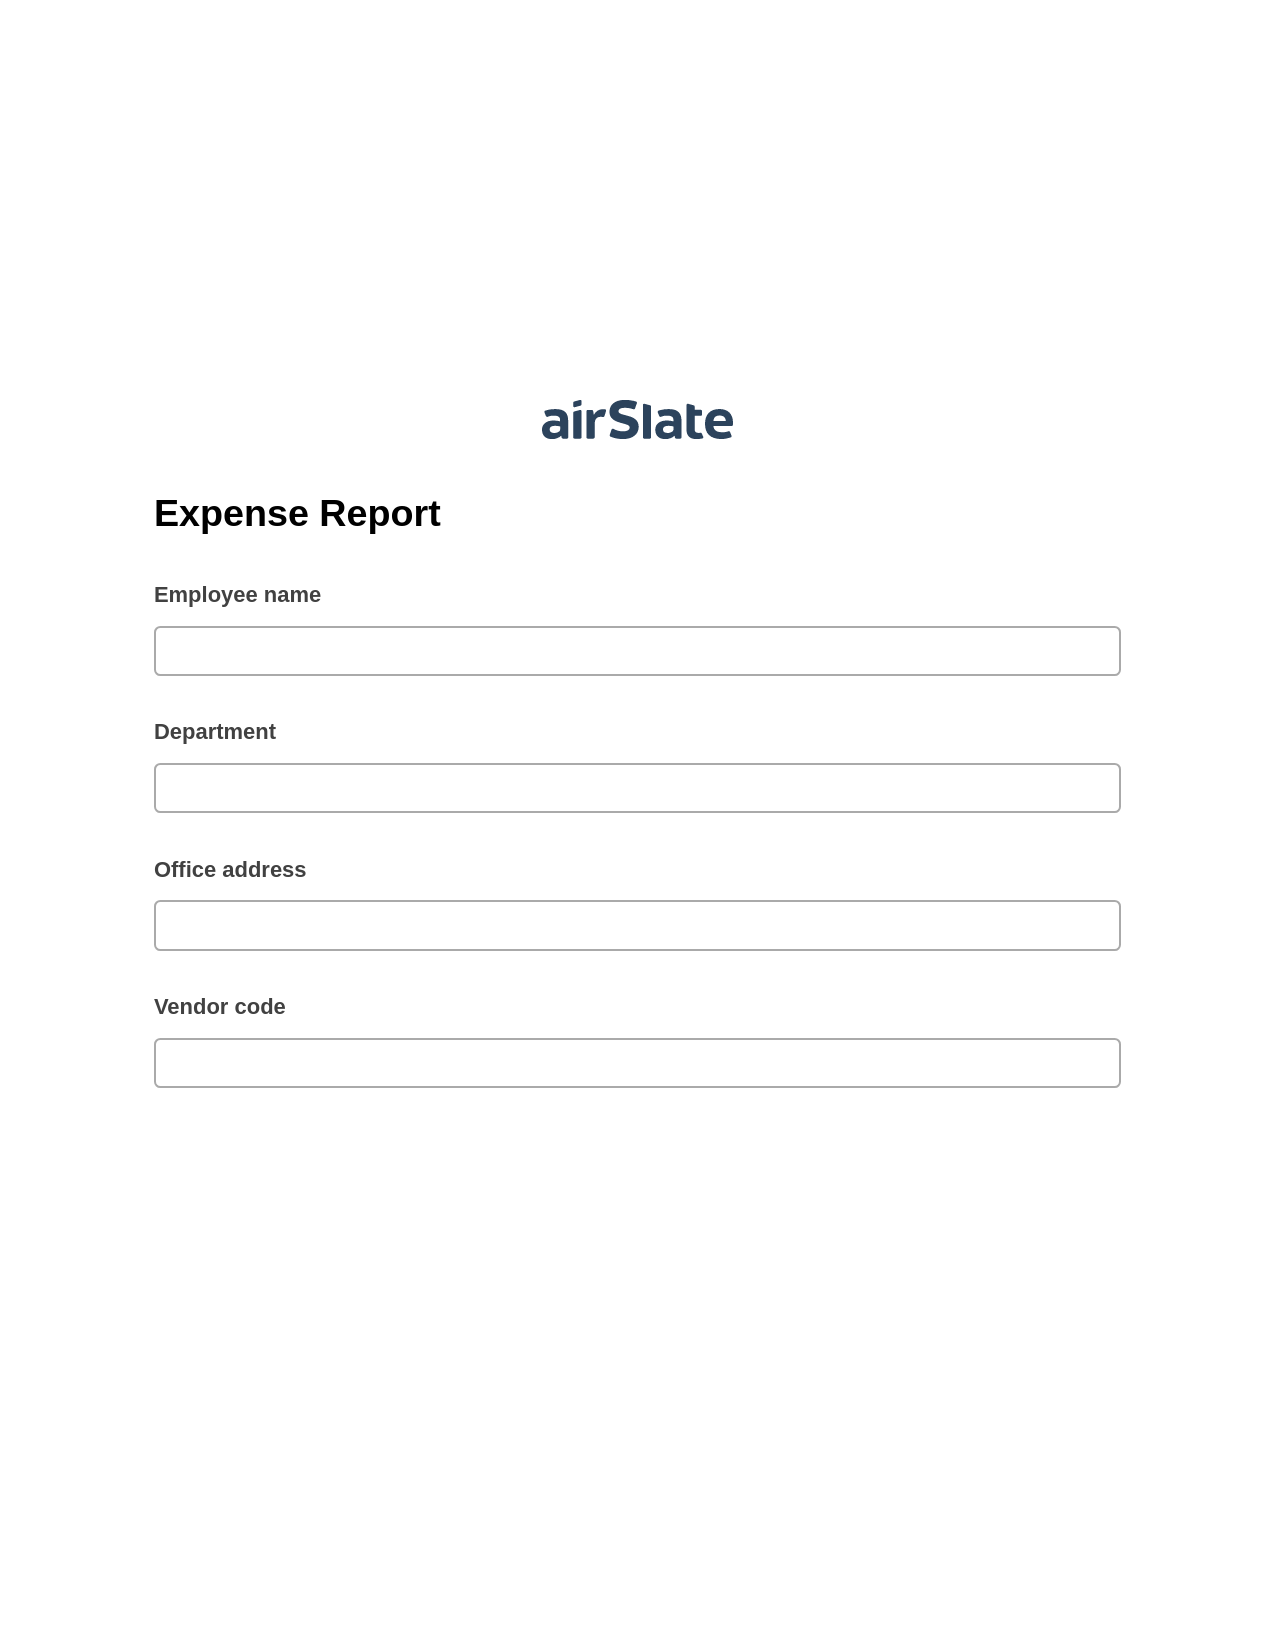 Multirole Expense Report Pre-fill from another Slate Bot, Revoke Access Bot, Post-finish Document Bot